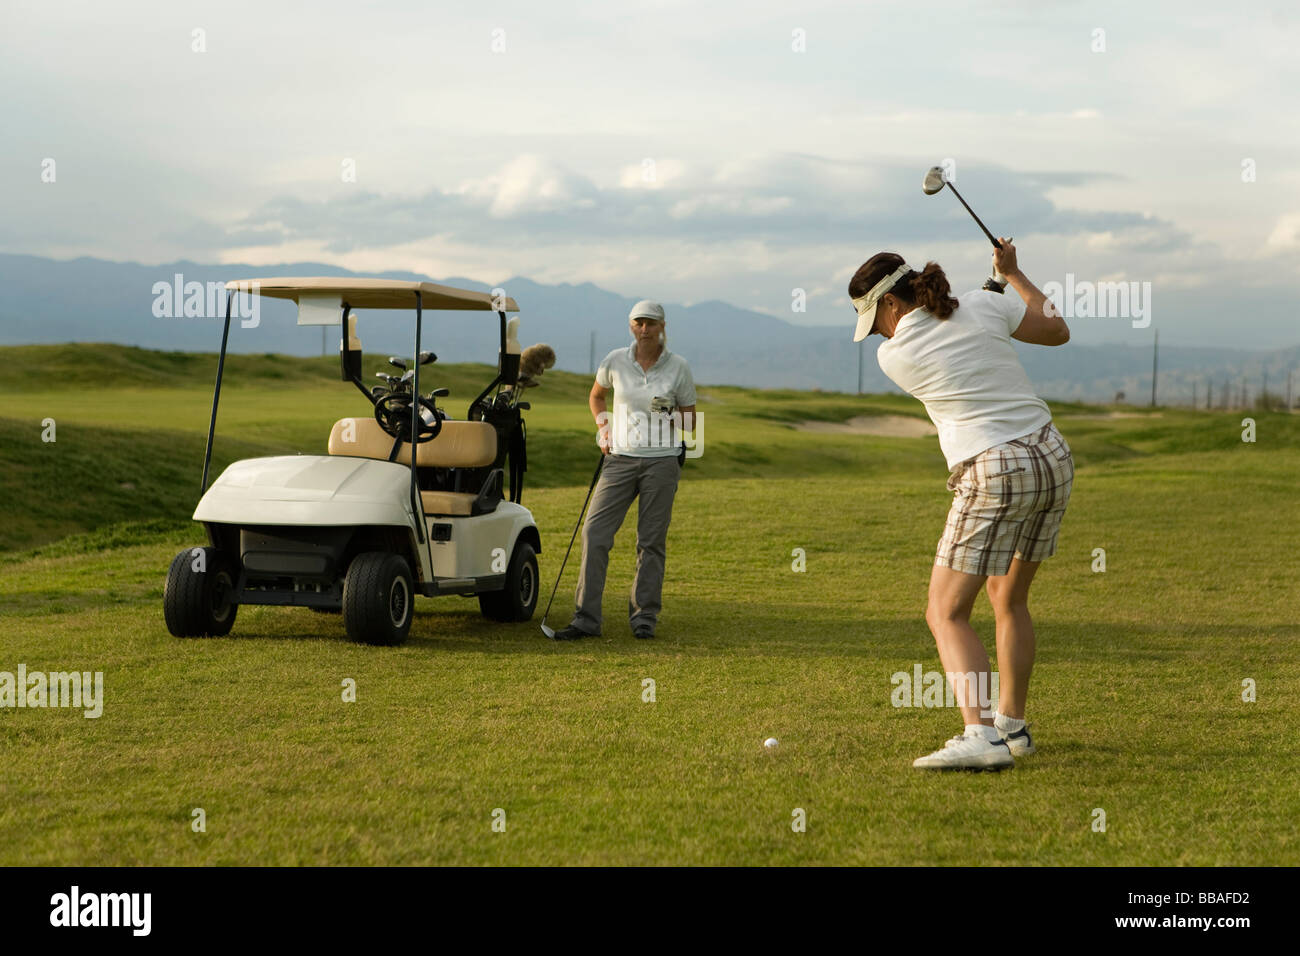 Two women playing golf together, Palm Springs, California, USA Stock Photo